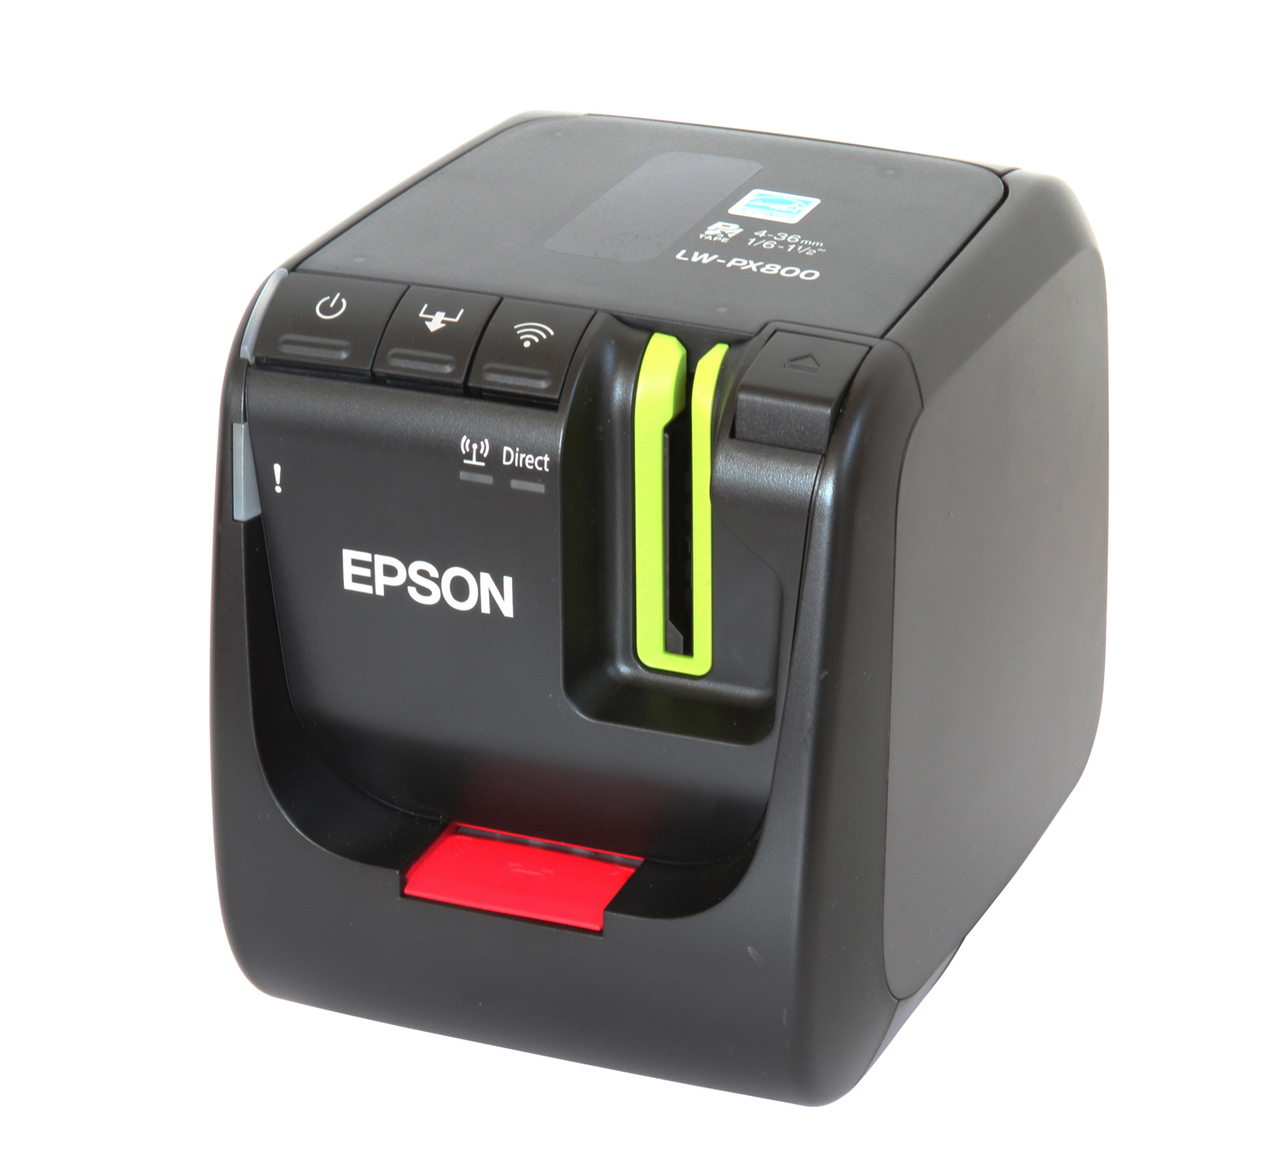 Epson LabelWorks LW-PX800 Portable Label Printer - 360 dpi - Thermal Transfer